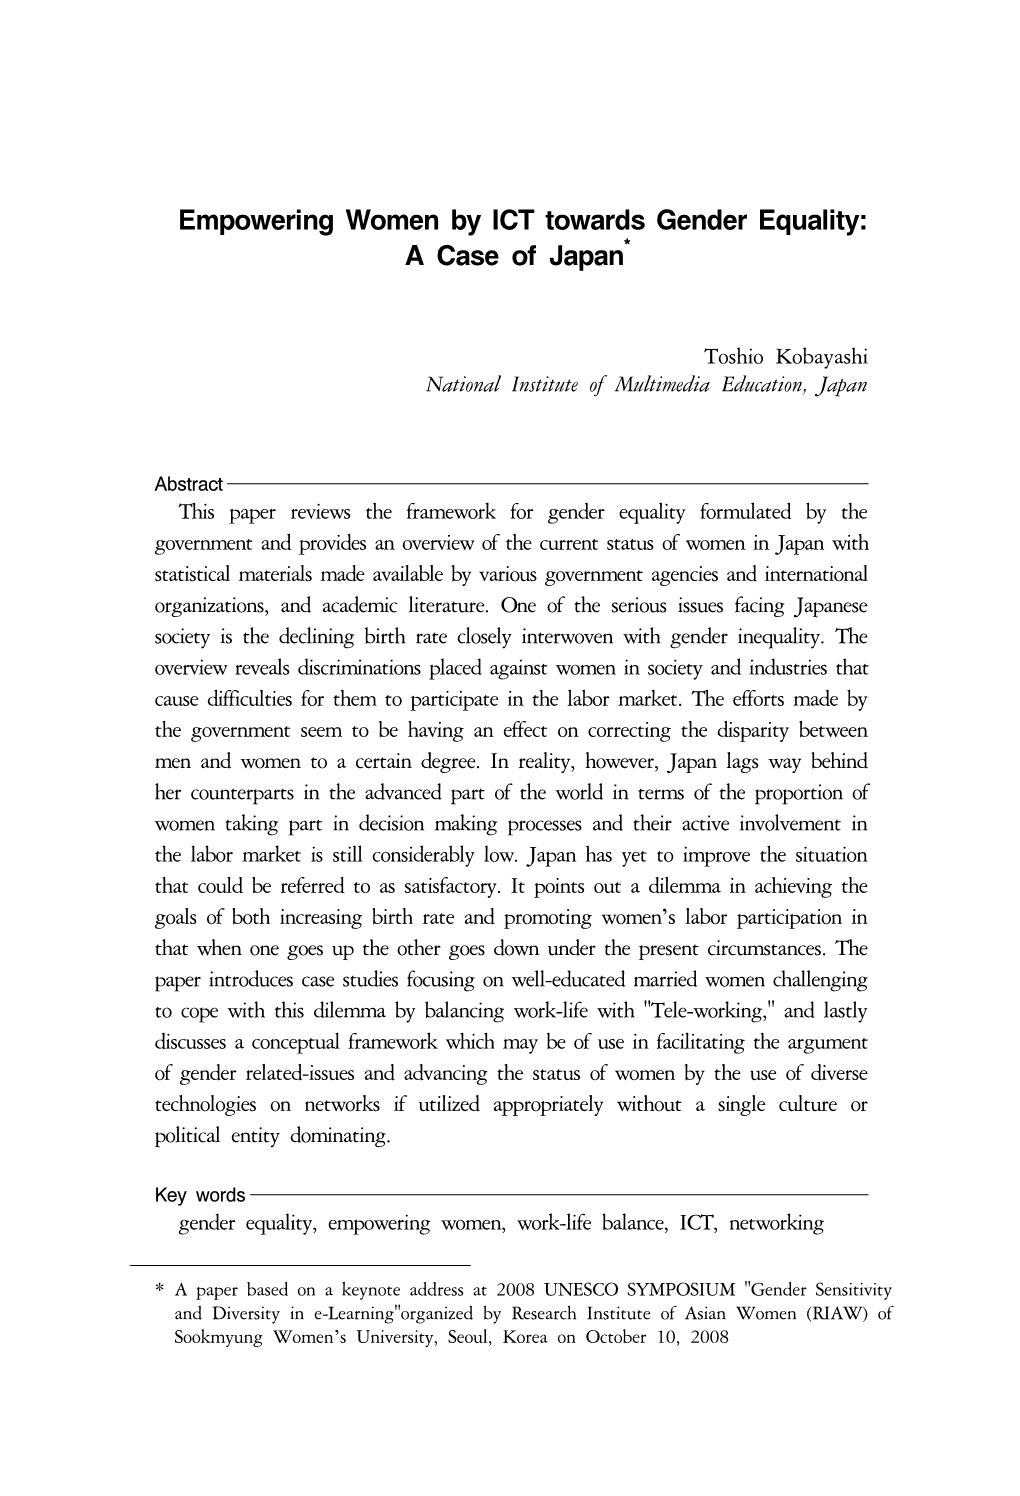 Empowering Women by ICT Towards Gender Equality: a Case of Japan*1